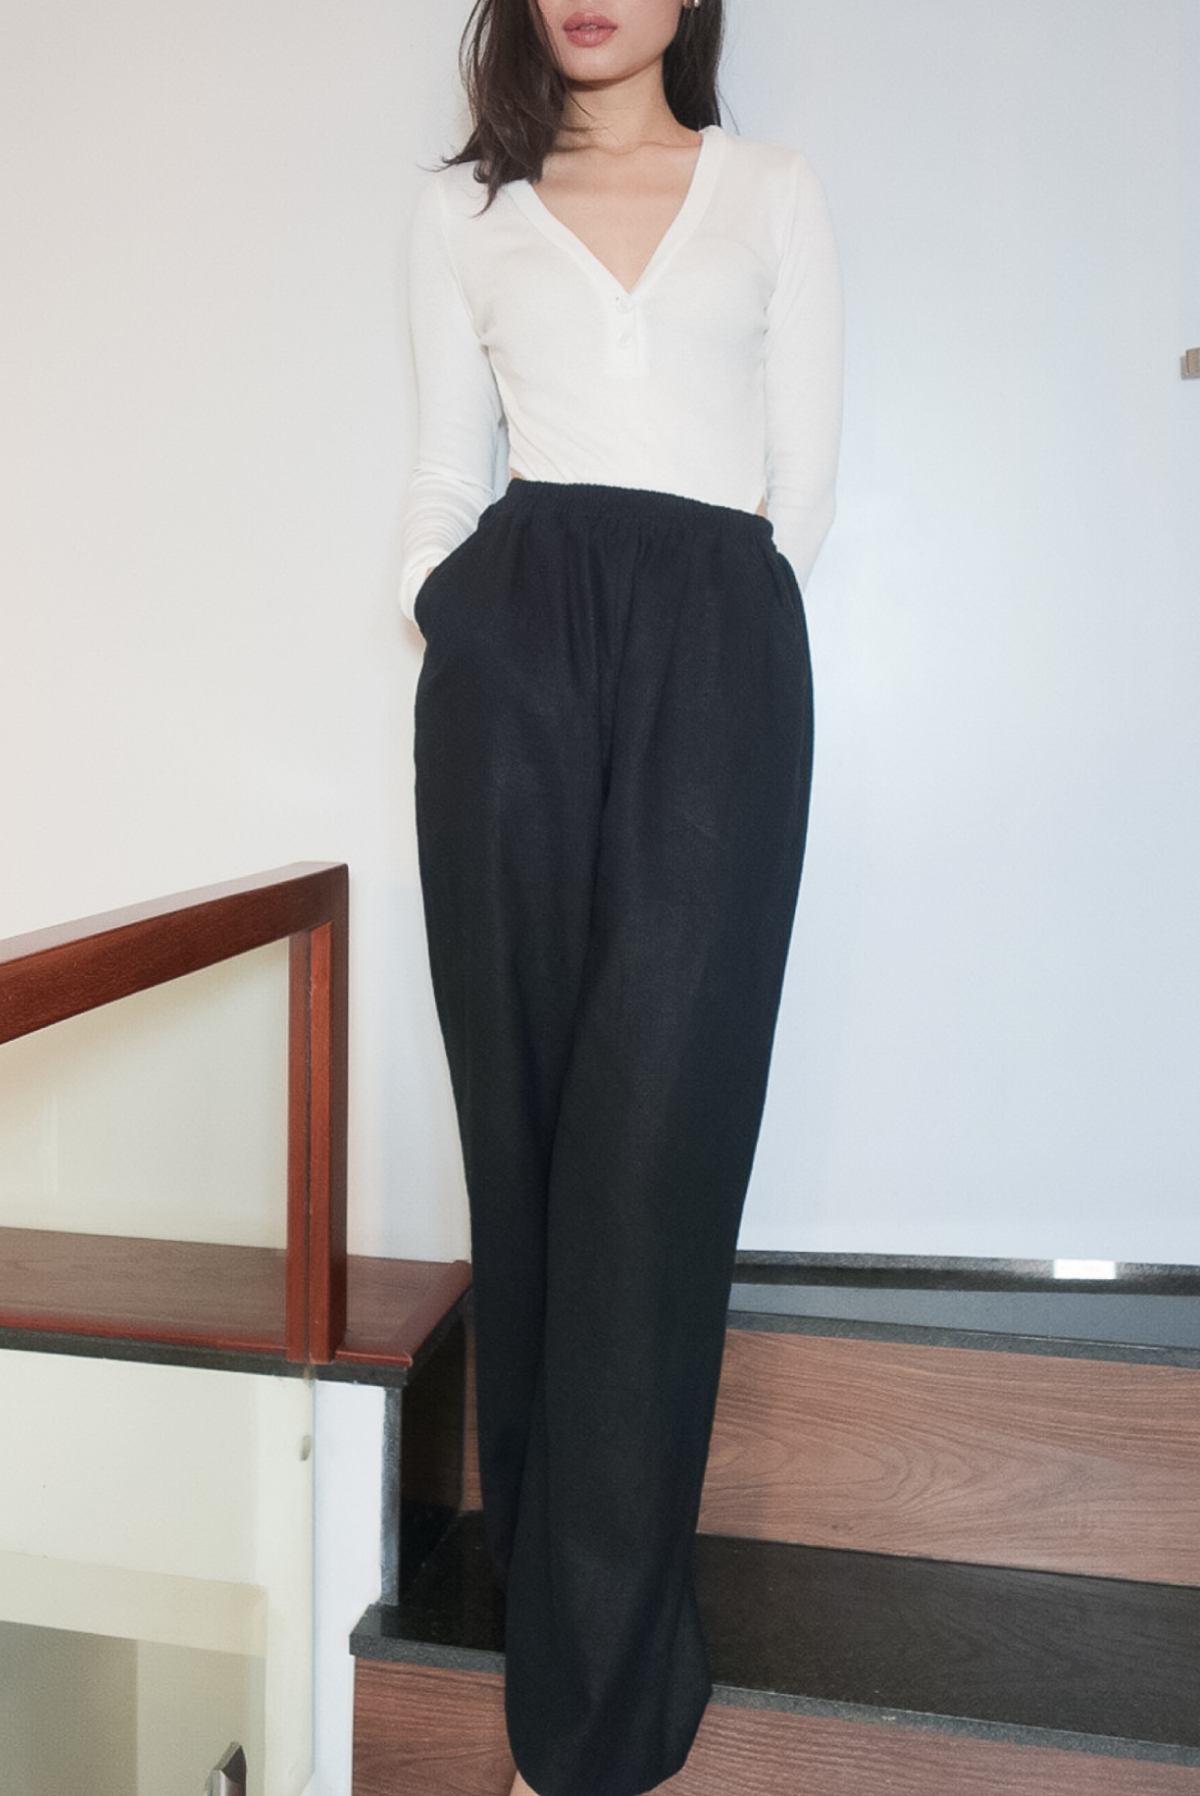 What to Wear with Black Linen Pants? | MagicLinen